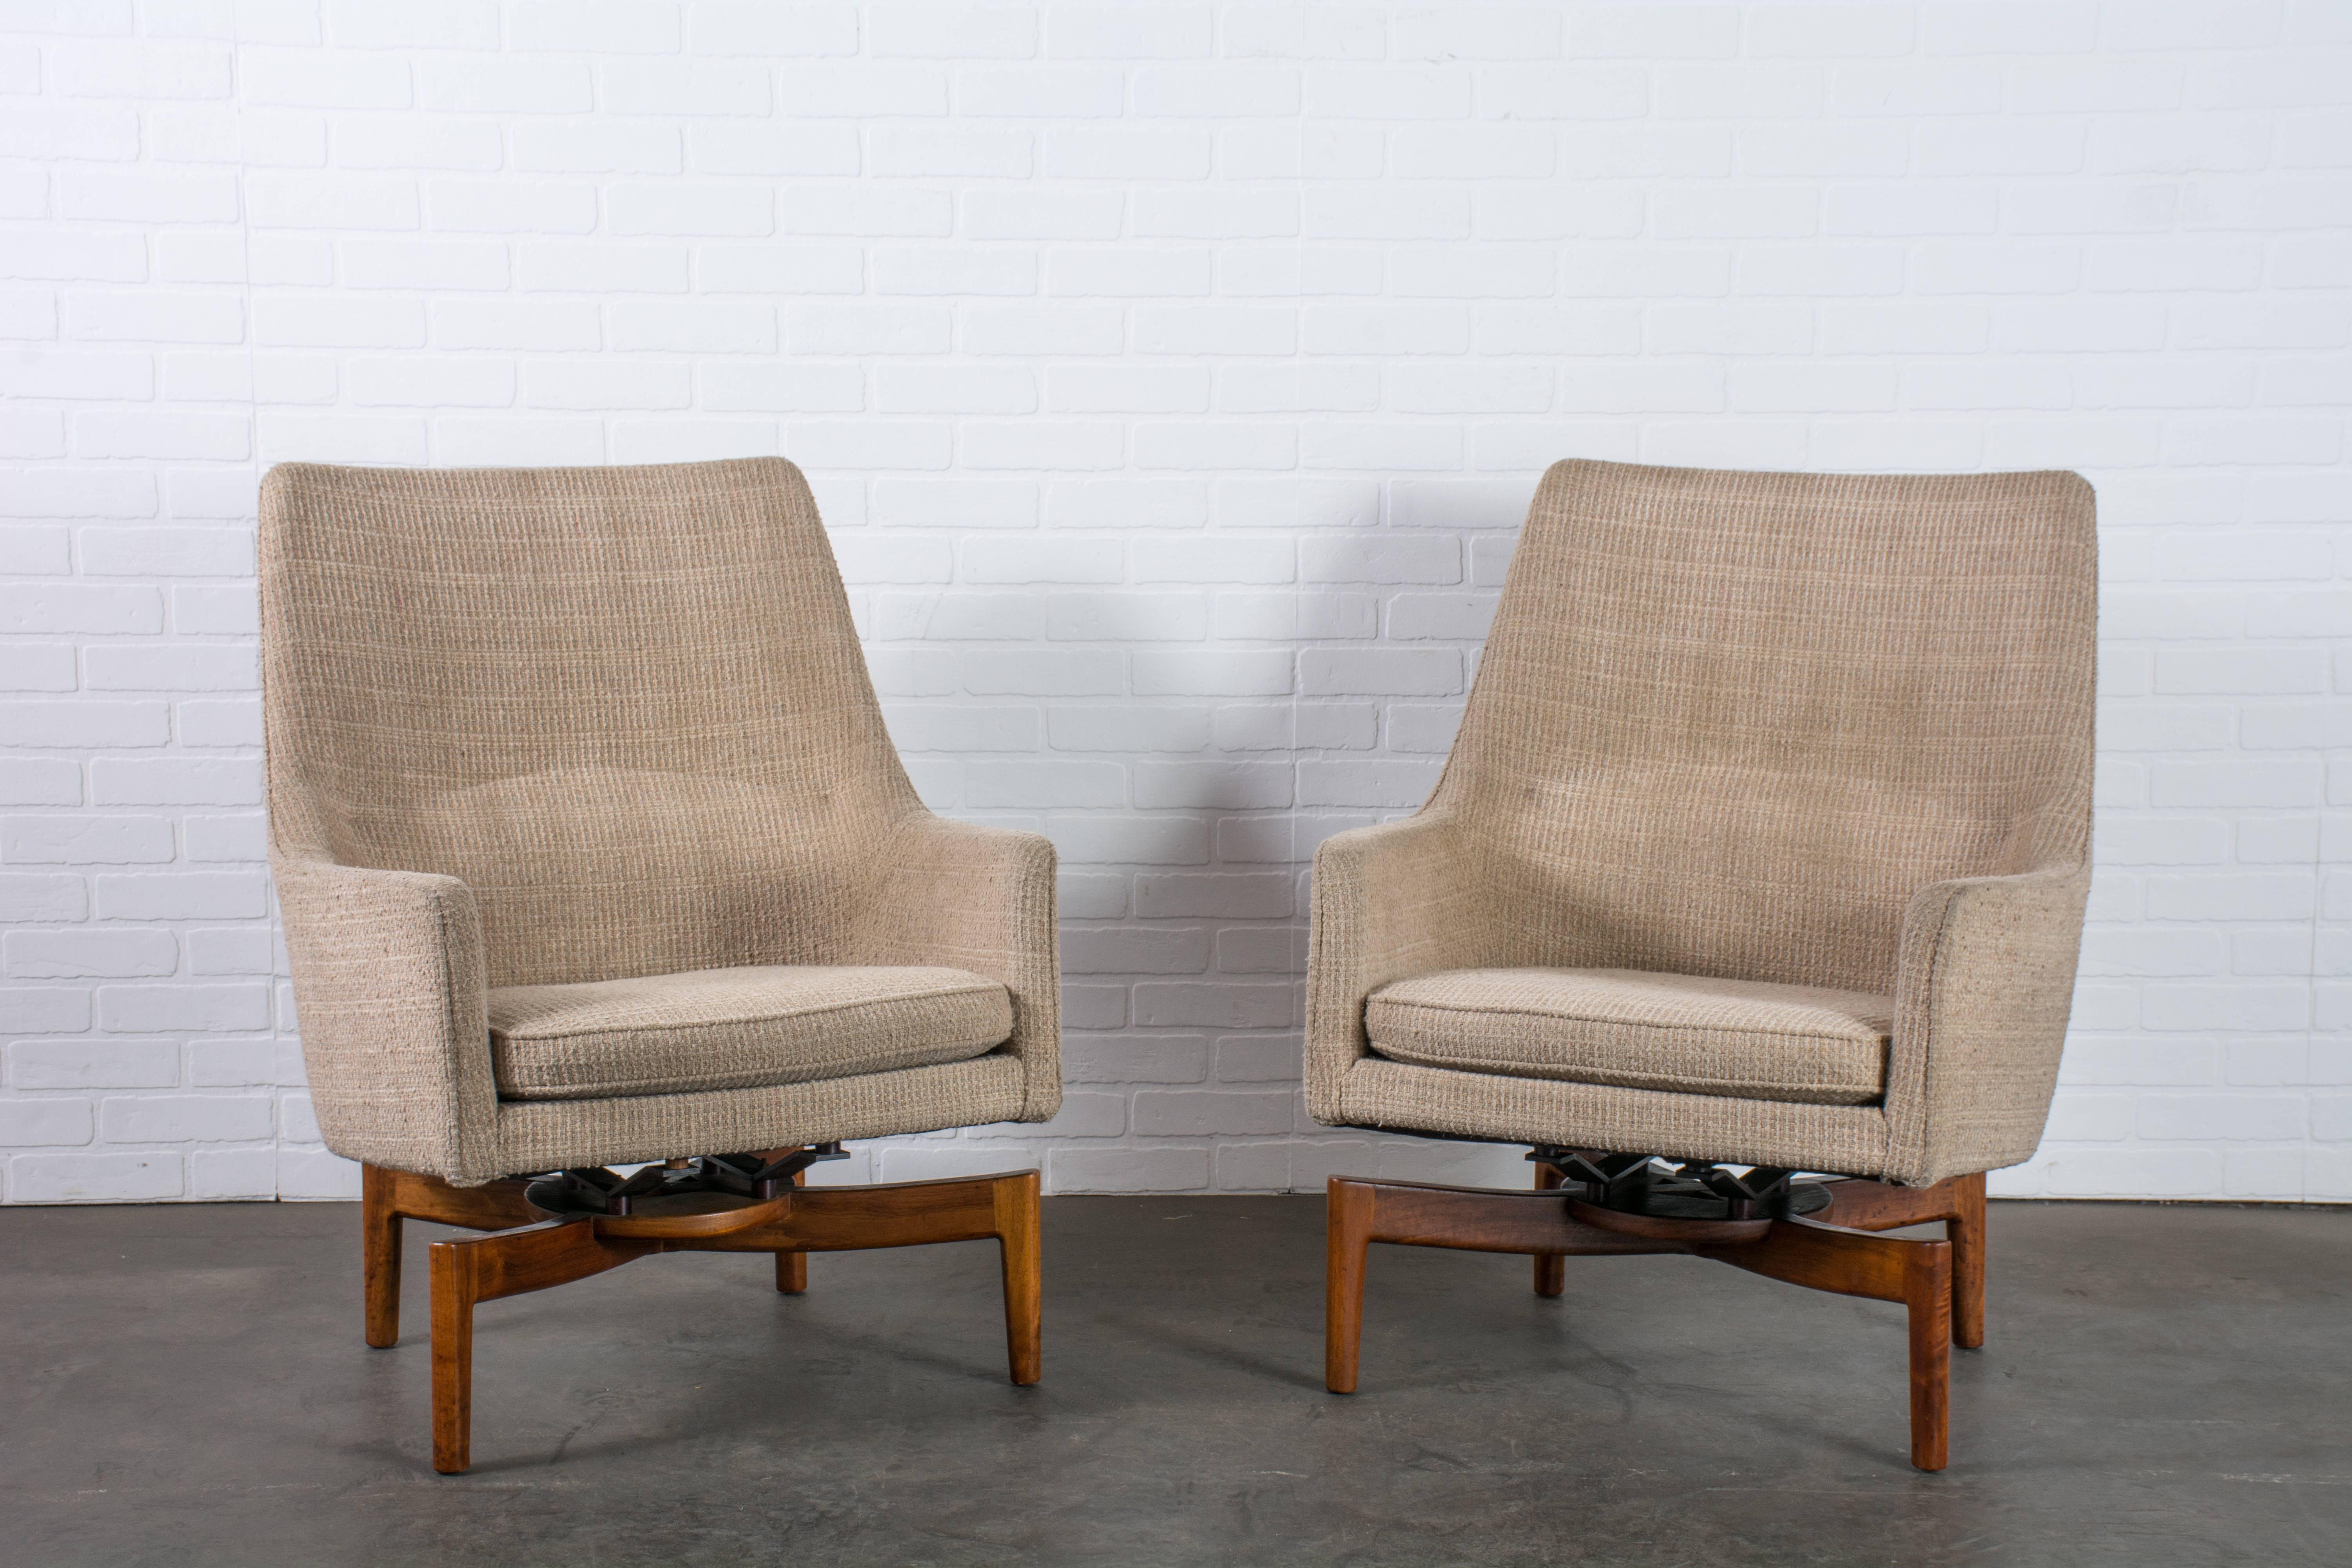 This pair of vintage Mid-Century lounge chairs was designed by Jens Risom, circa 1960s. They feature walnut bases and floating seats in the original beige upholstery.

